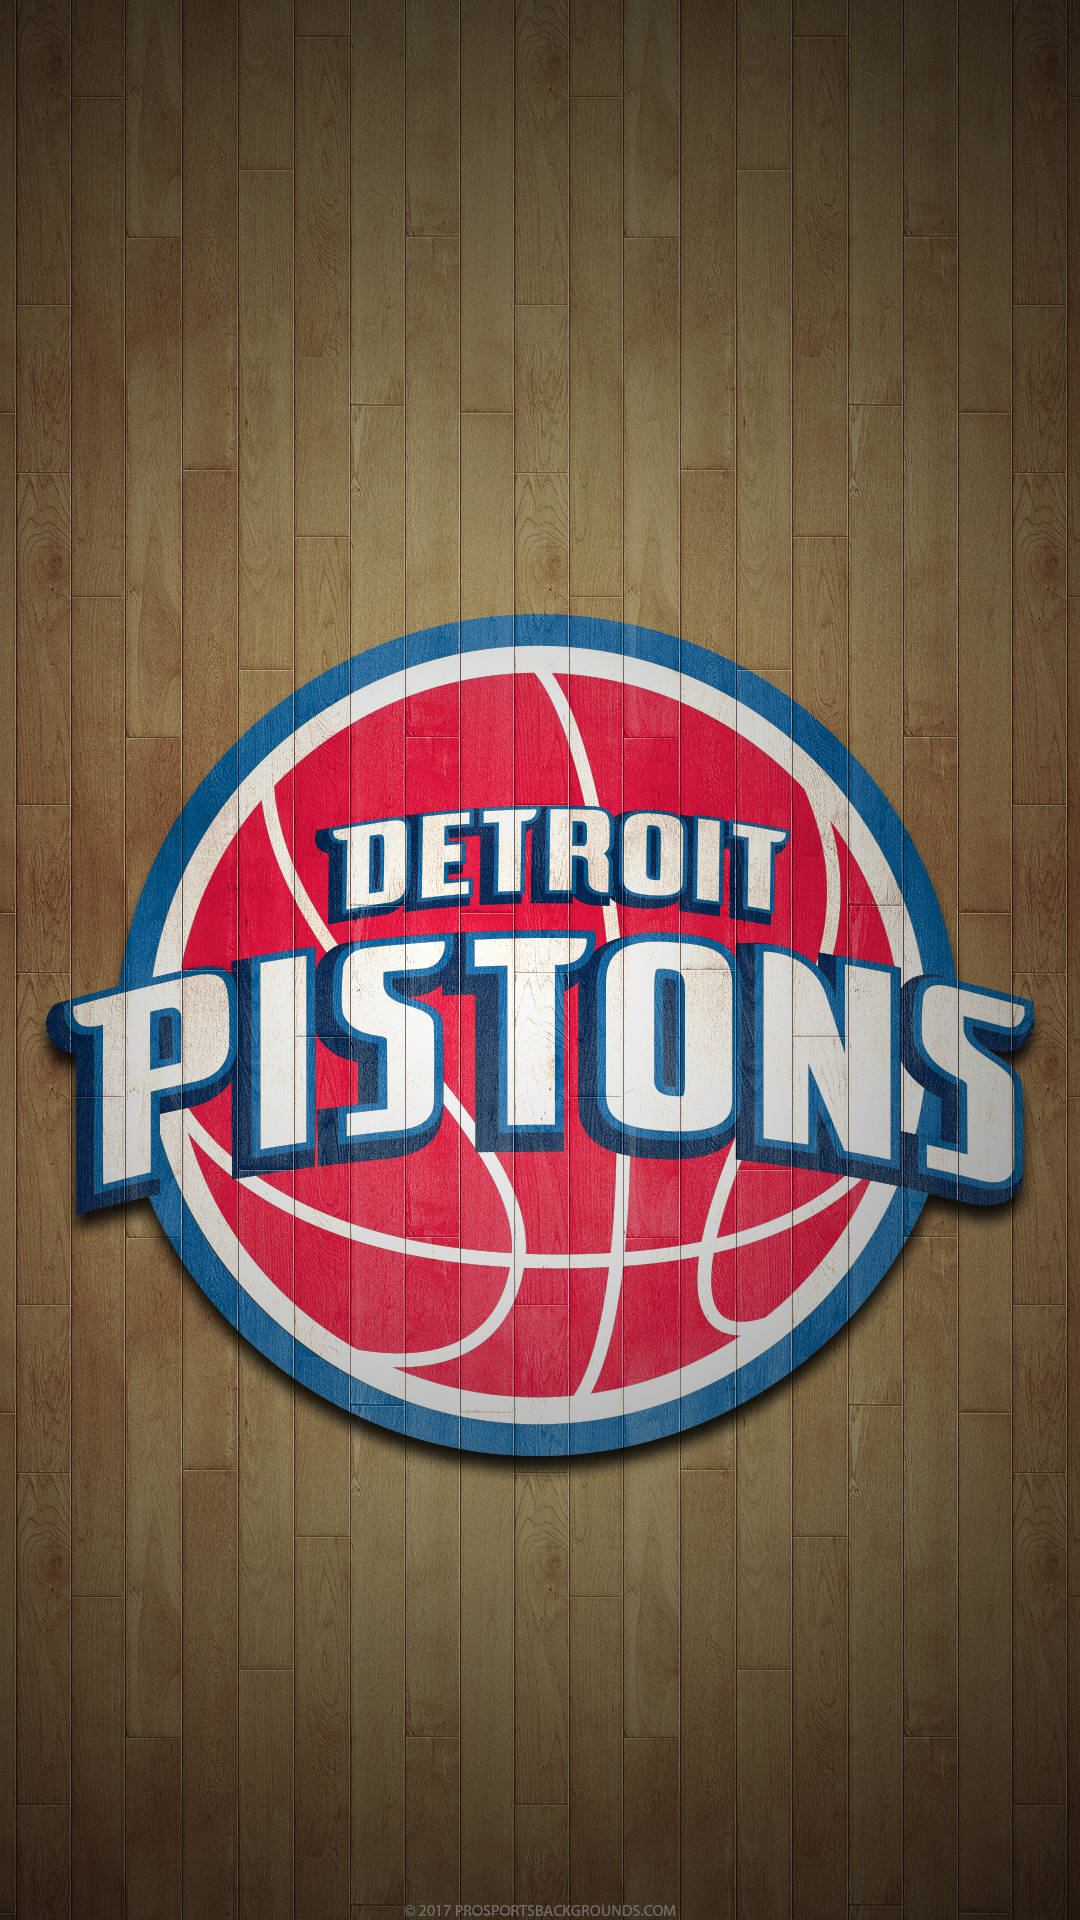 Detroit Pistons Logo Proudly Displayed On The Court